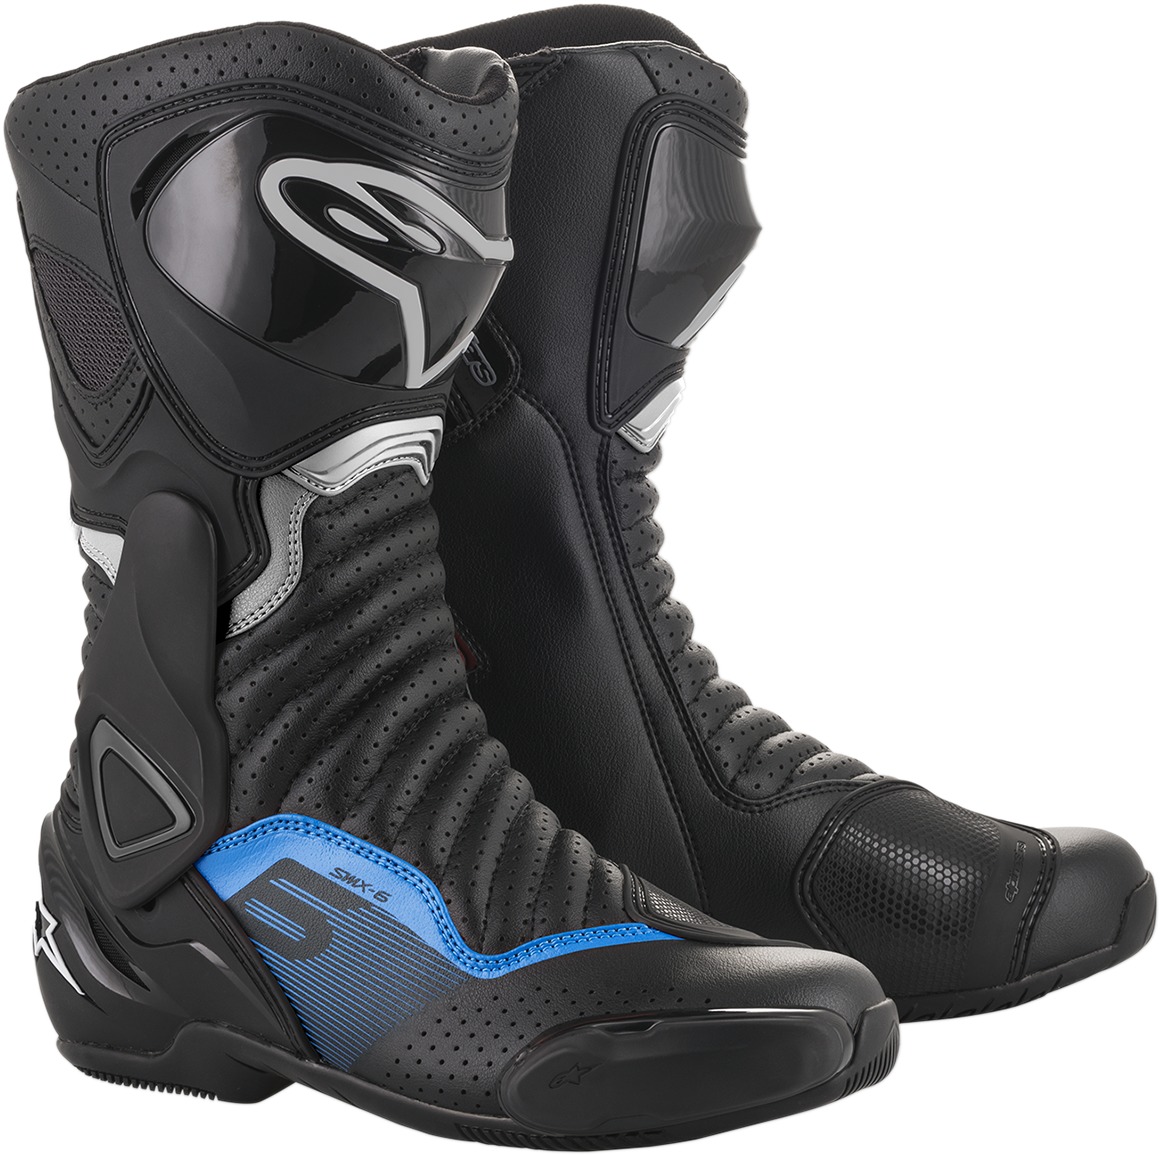 SMX-6 v2 Street Riding Boots Black/Blue/Gray/White US 11.5 - Click Image to Close